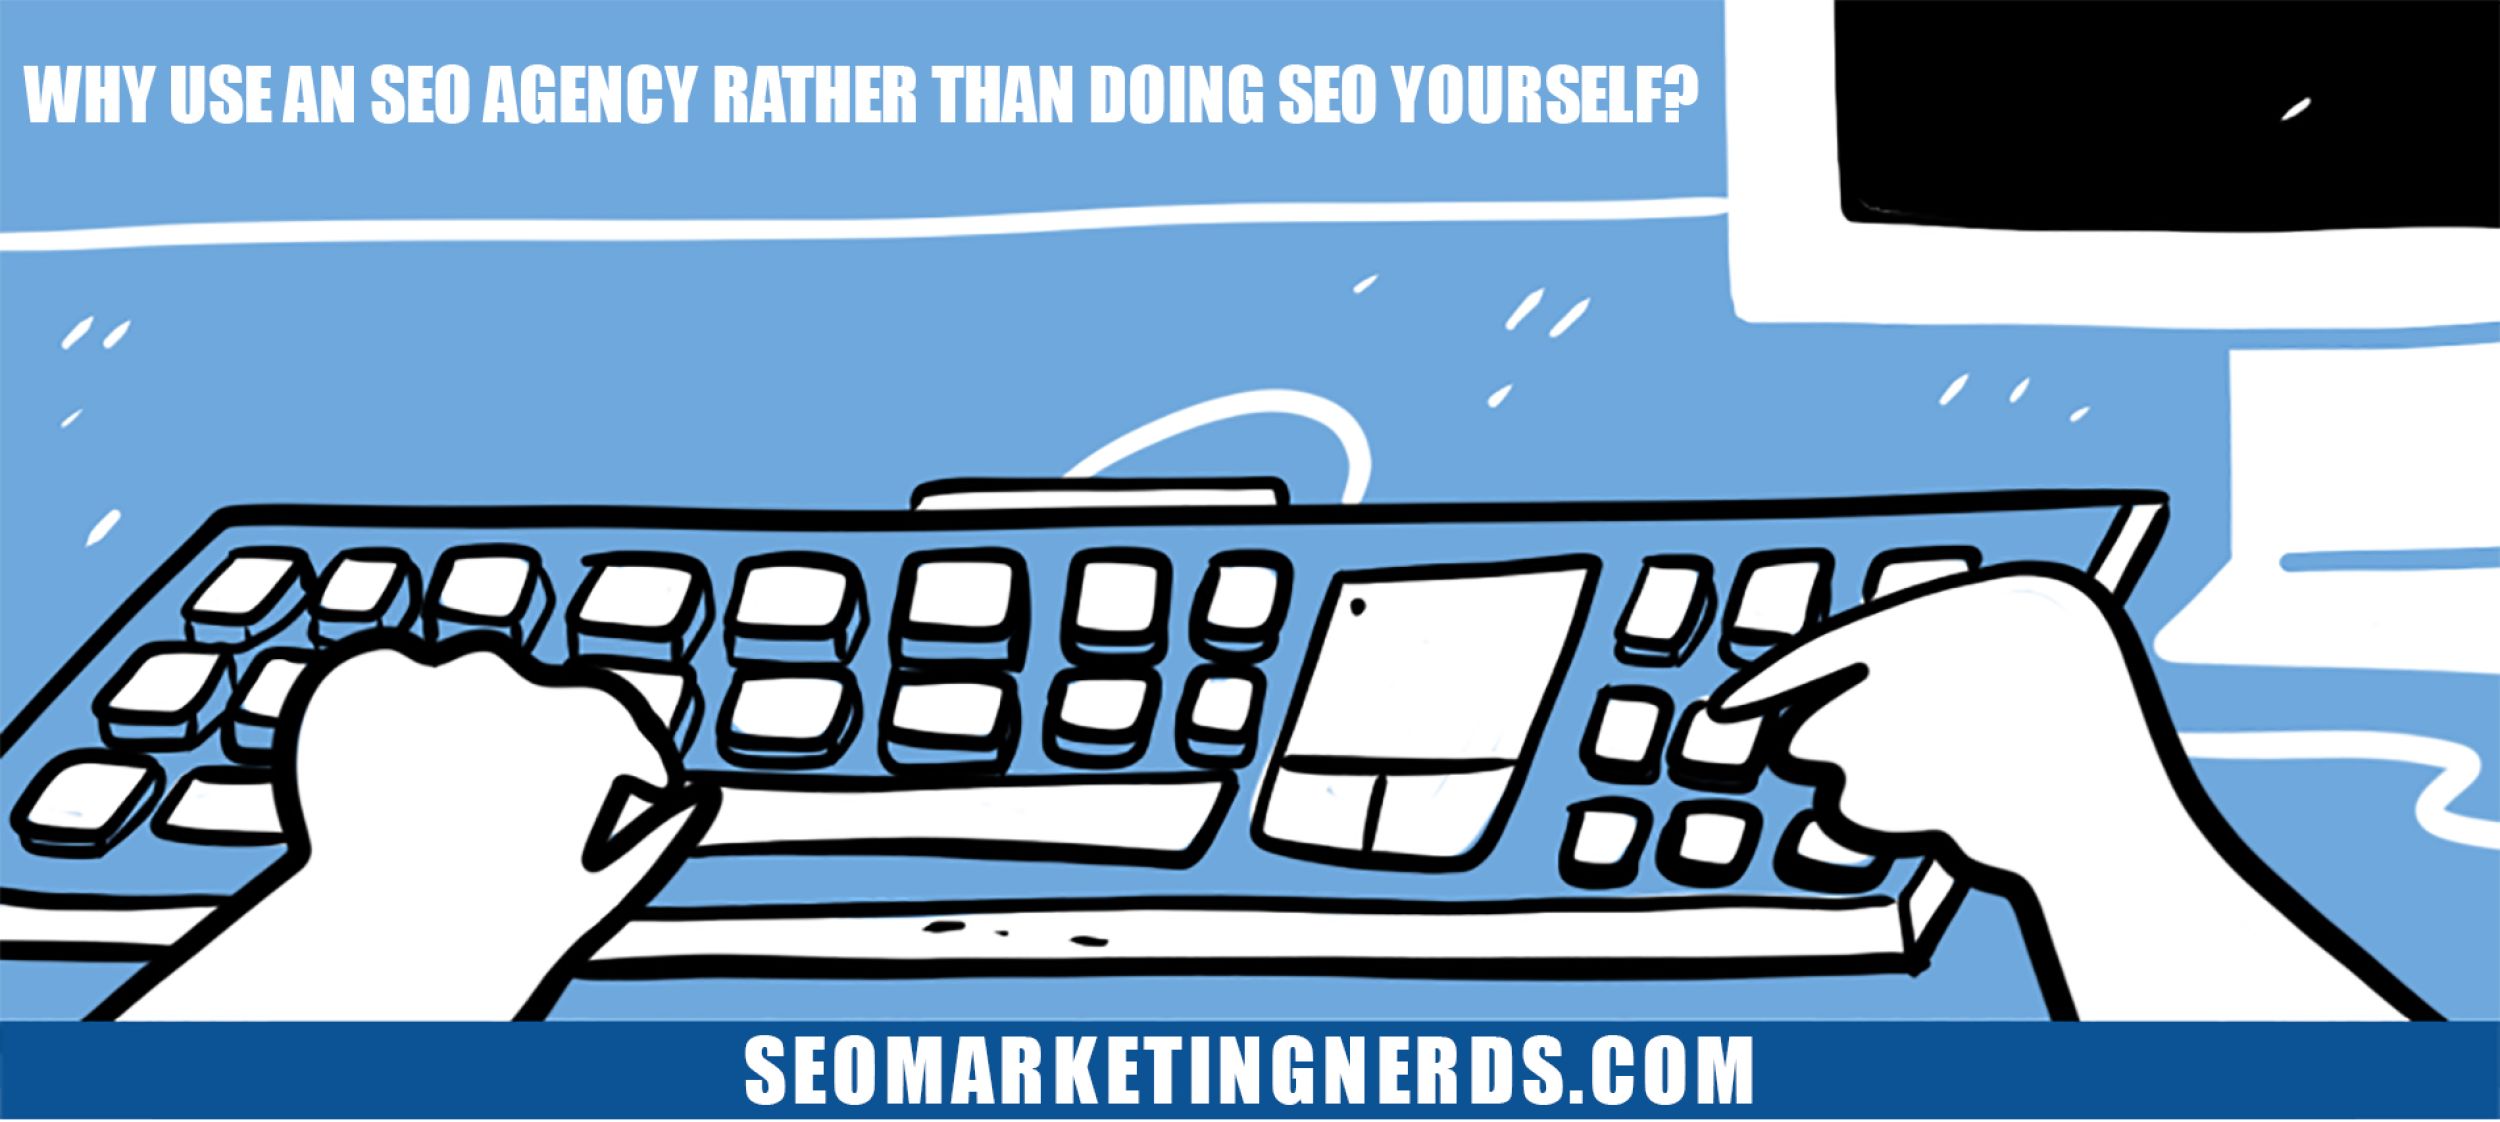 Why use an SEO agency rather than doing SEO yourself?